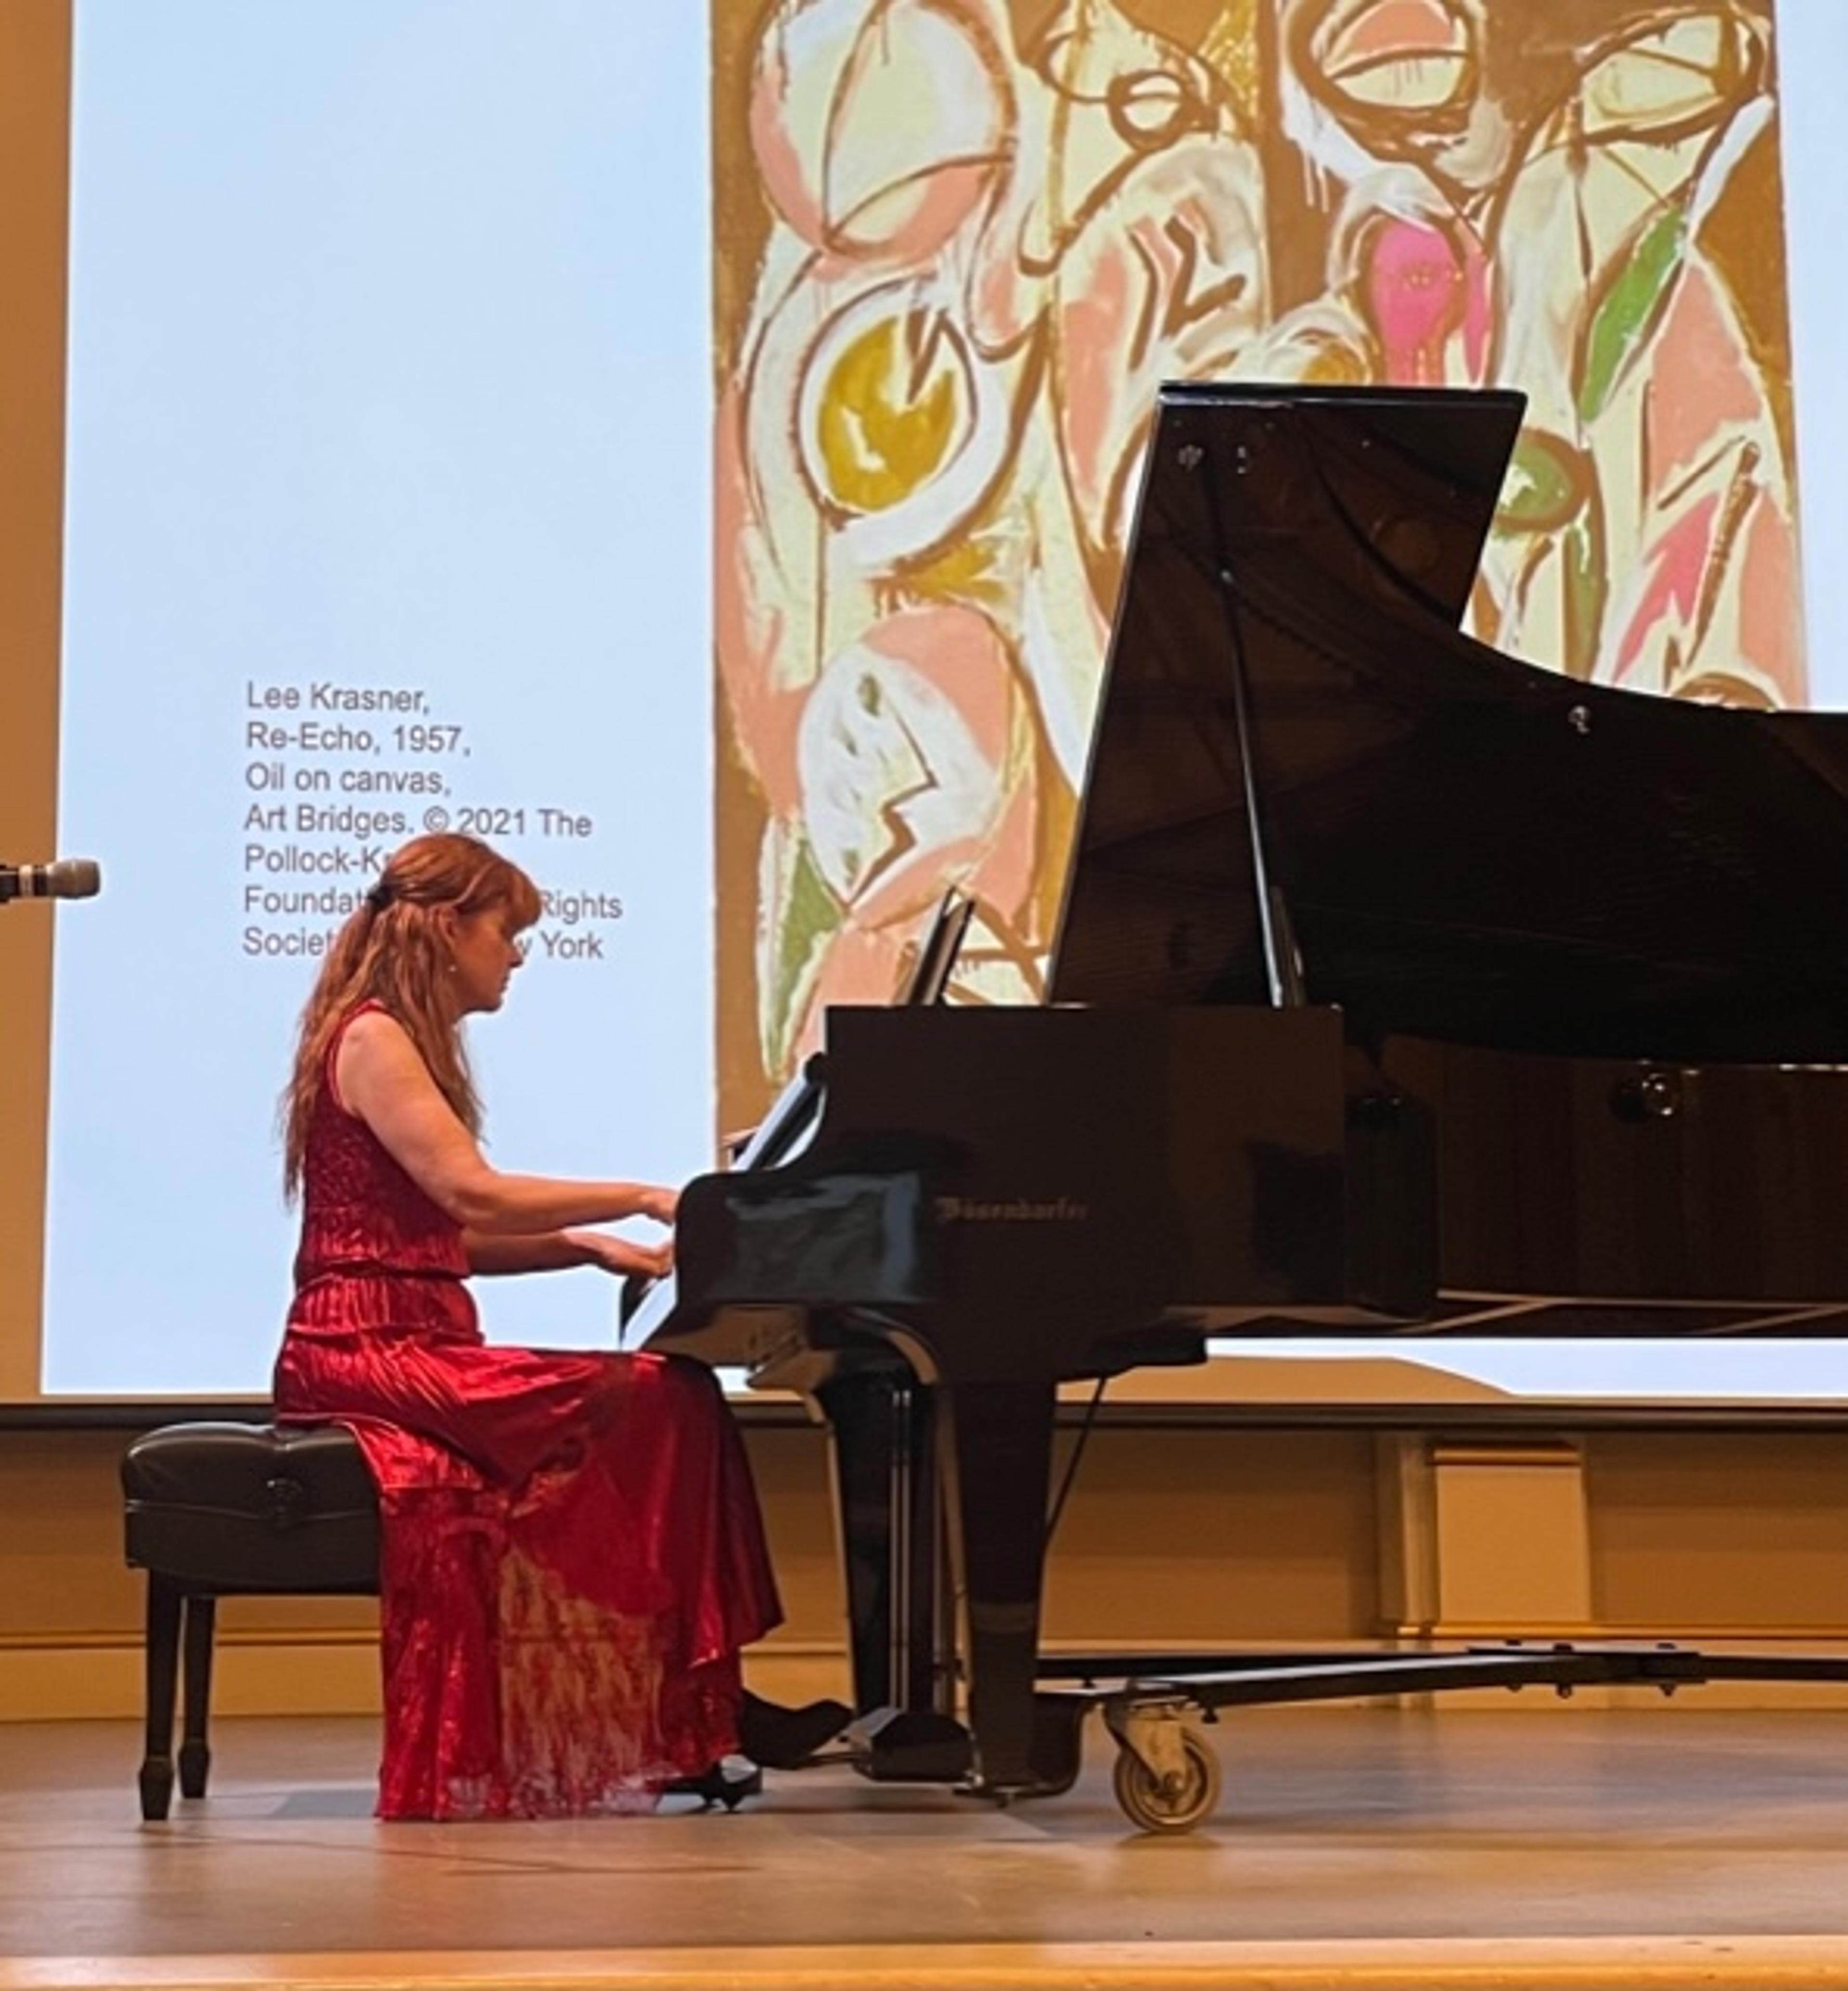 Lee Krasner Re-Echo with Sarah Cahill performing on piano